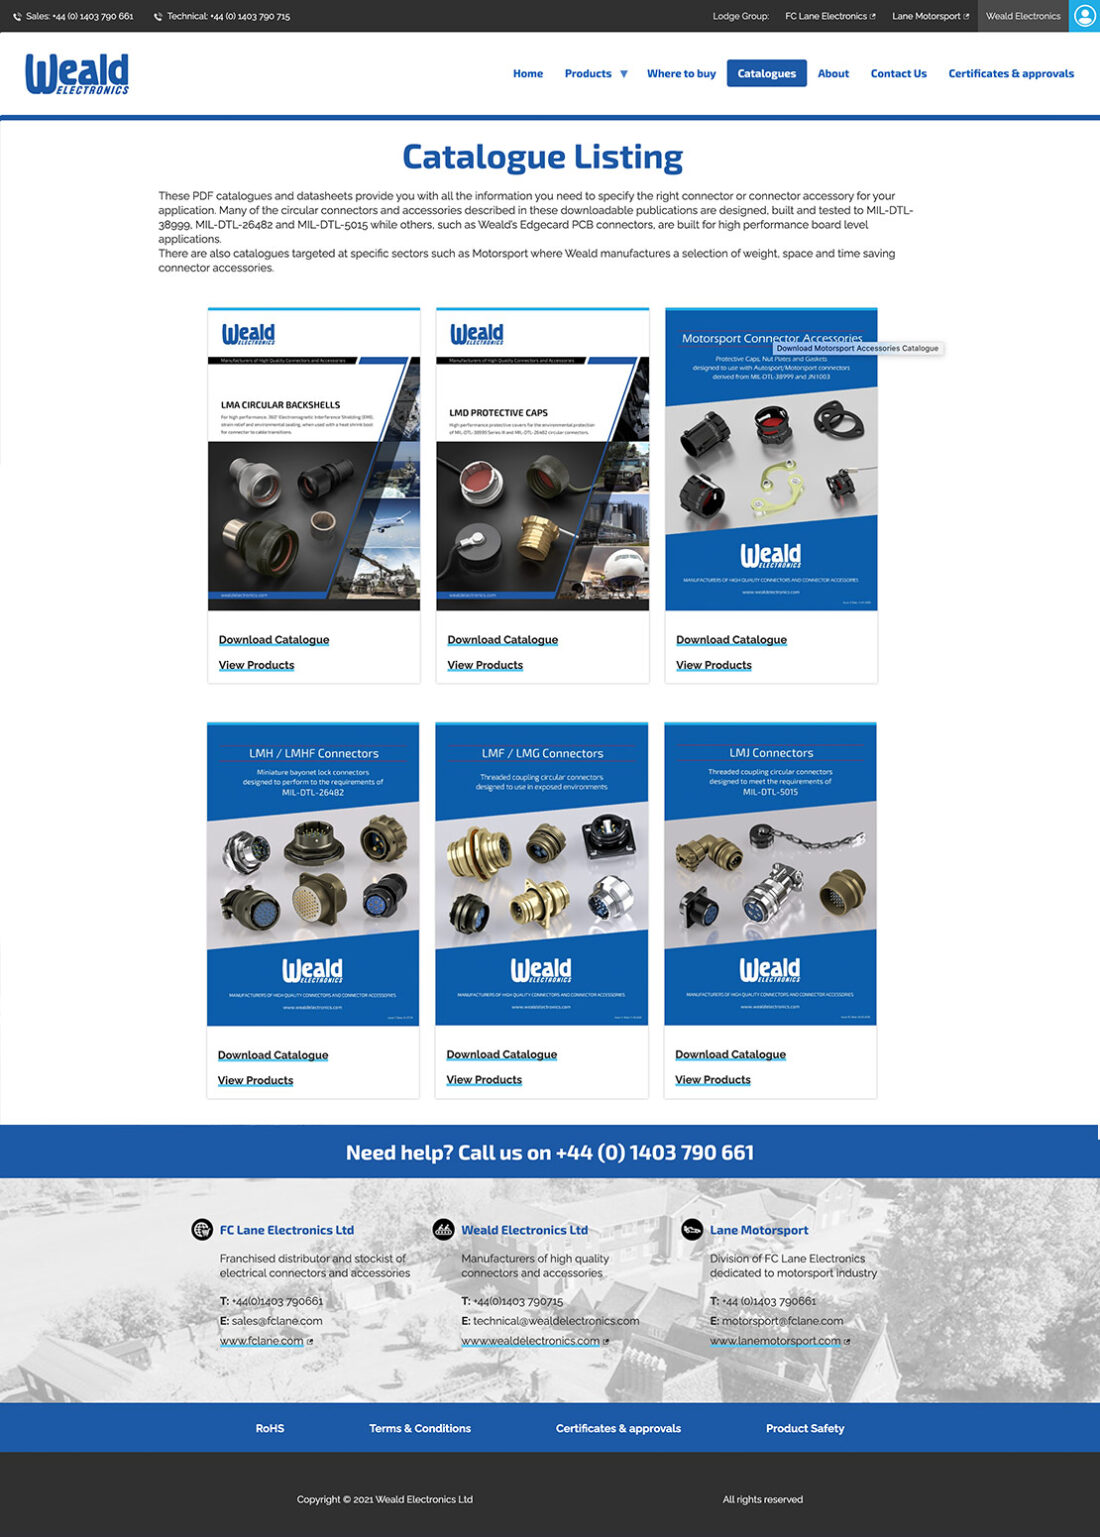 Weald Electronics Catalogue Download Page visual